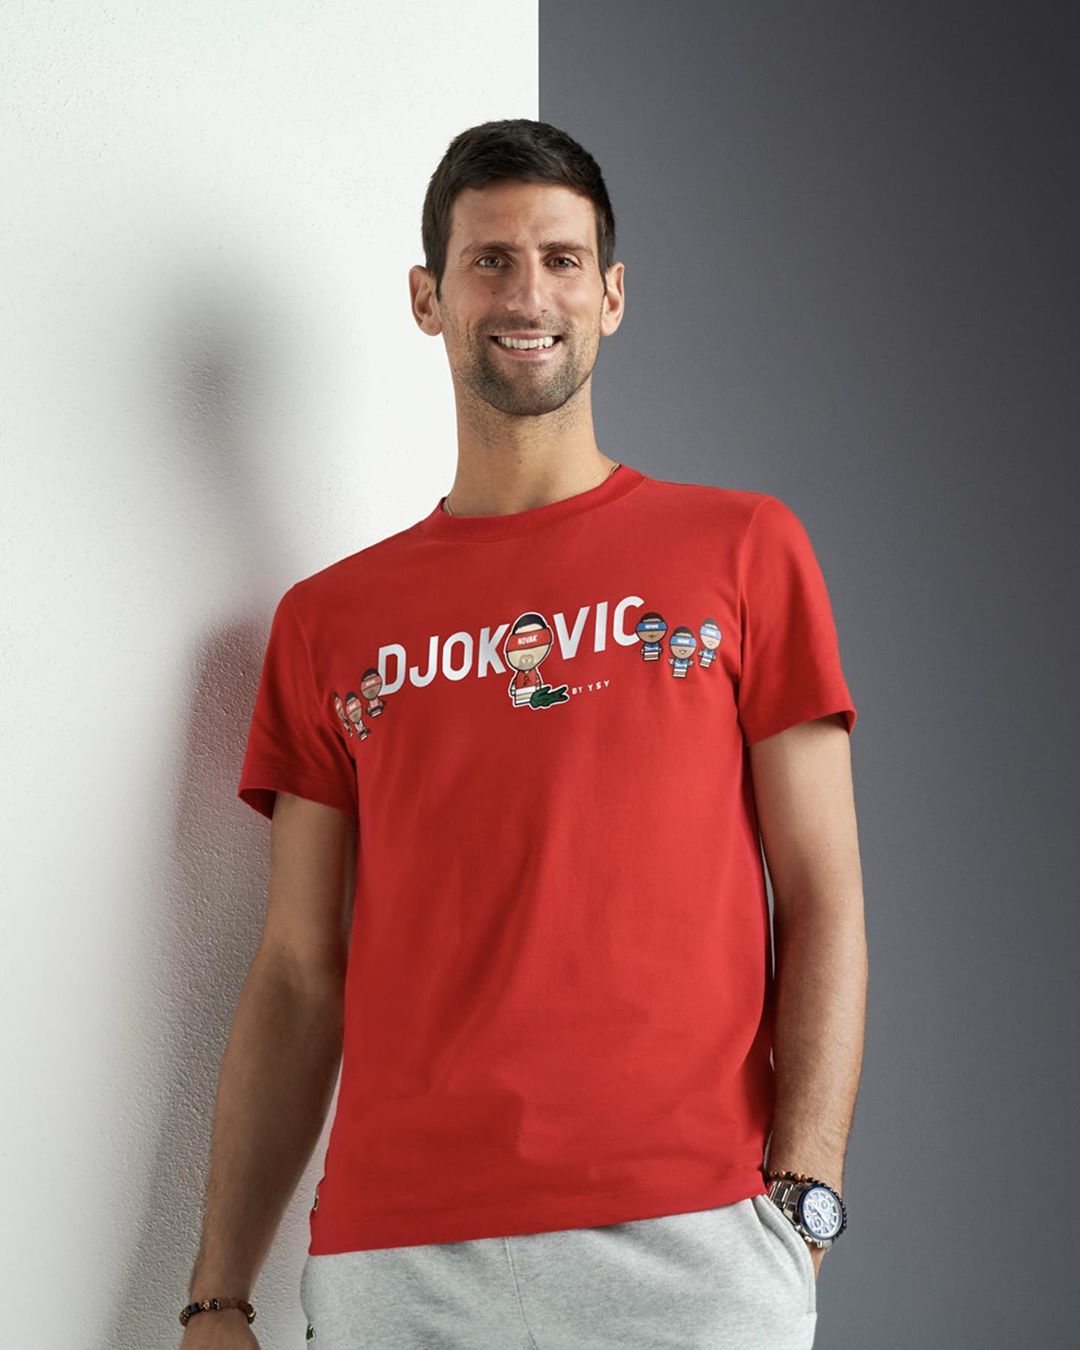 Lacoste - It’s time to get back on the court with @djokernole and the artist @takeitysy. A fan capsule in collaboration with a fan for the fans. Available now on lacoste.com. Link in bio. #NovakDjokov...